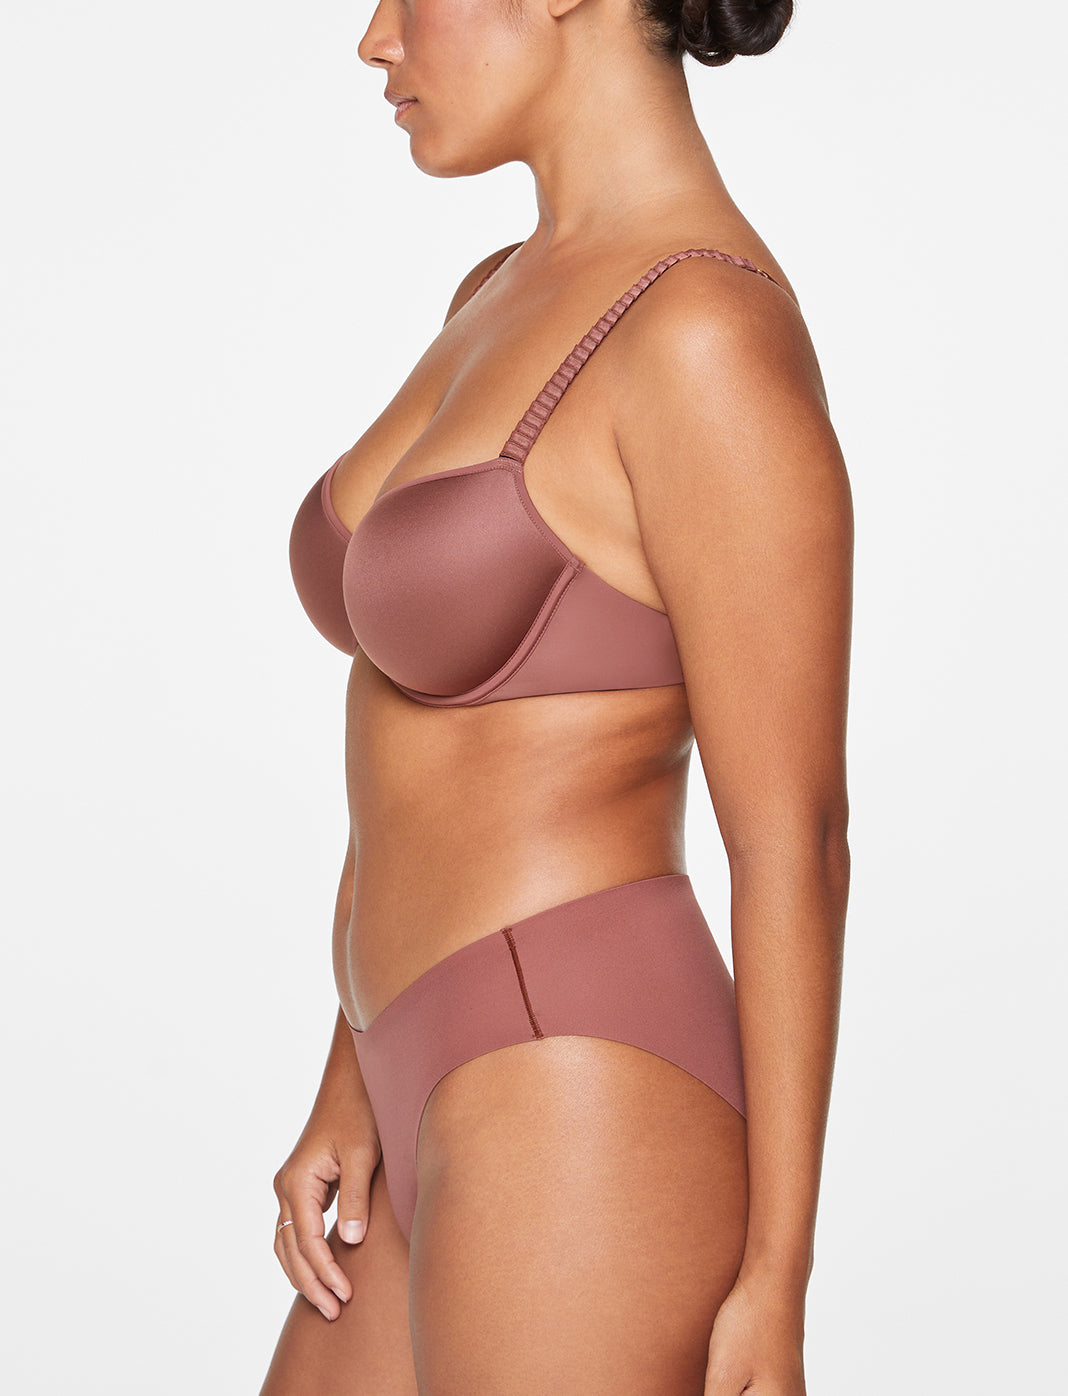 I bought two bras from ThirdLove. Here's my verdict. — Fifth & Finest